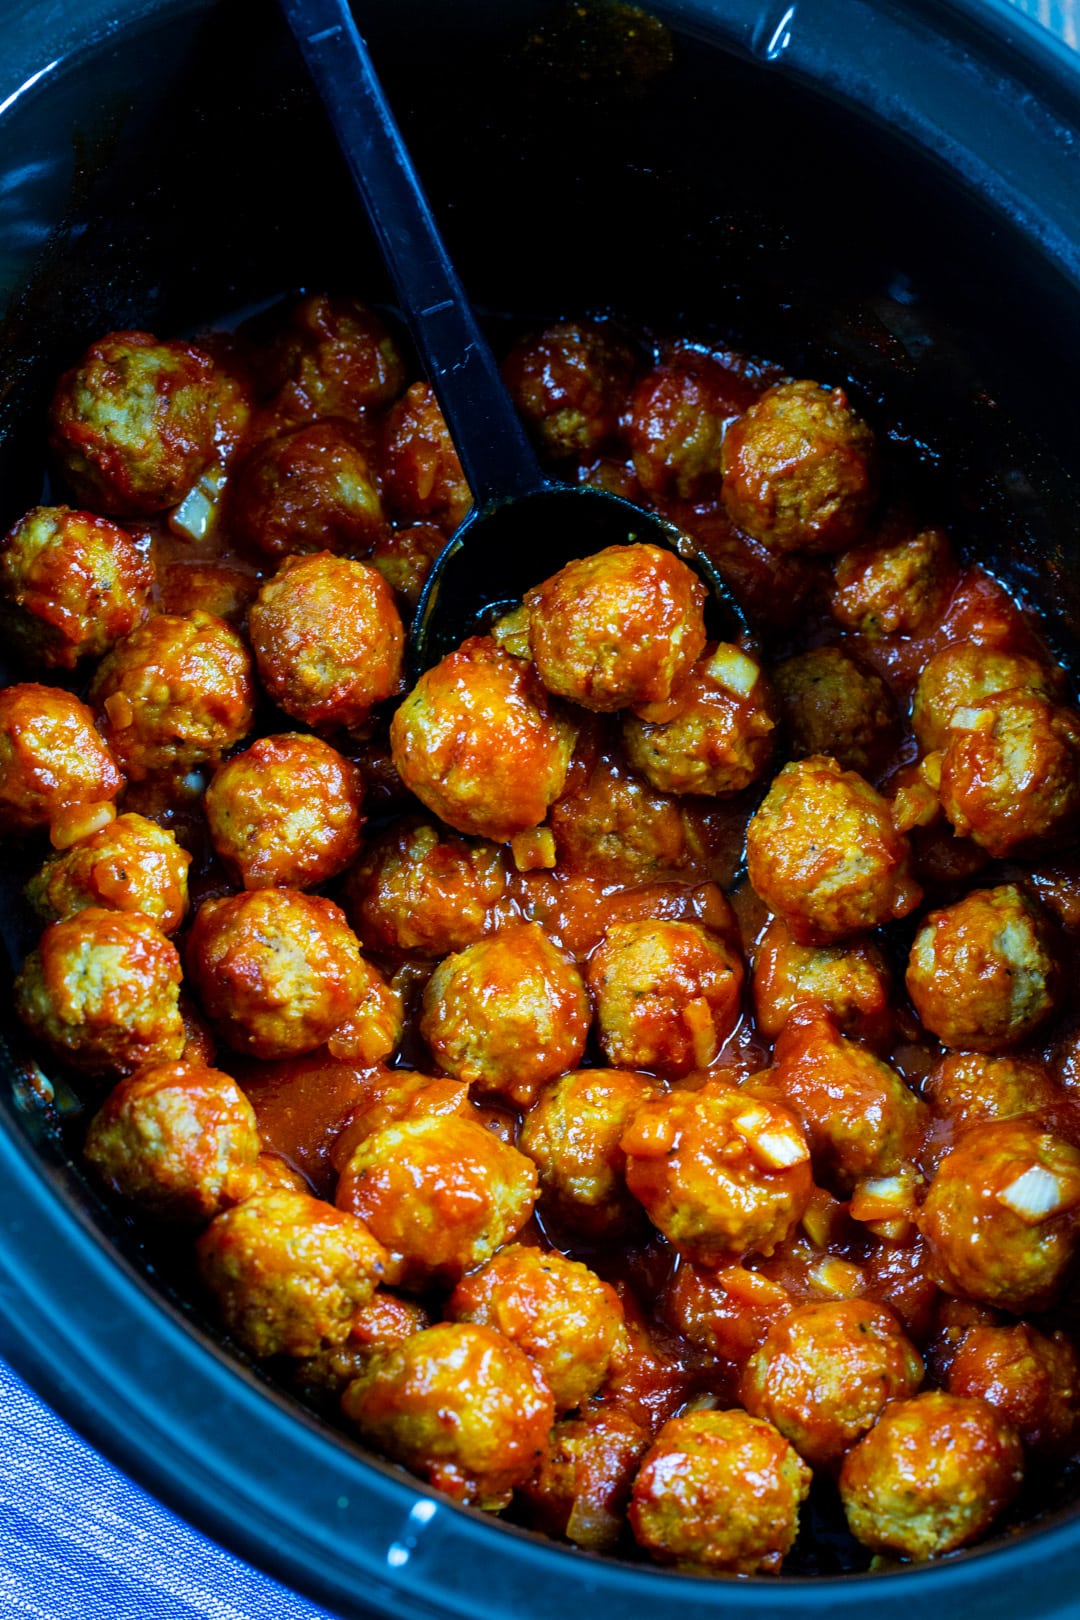 BBQ Meatballs in a slow cooker.